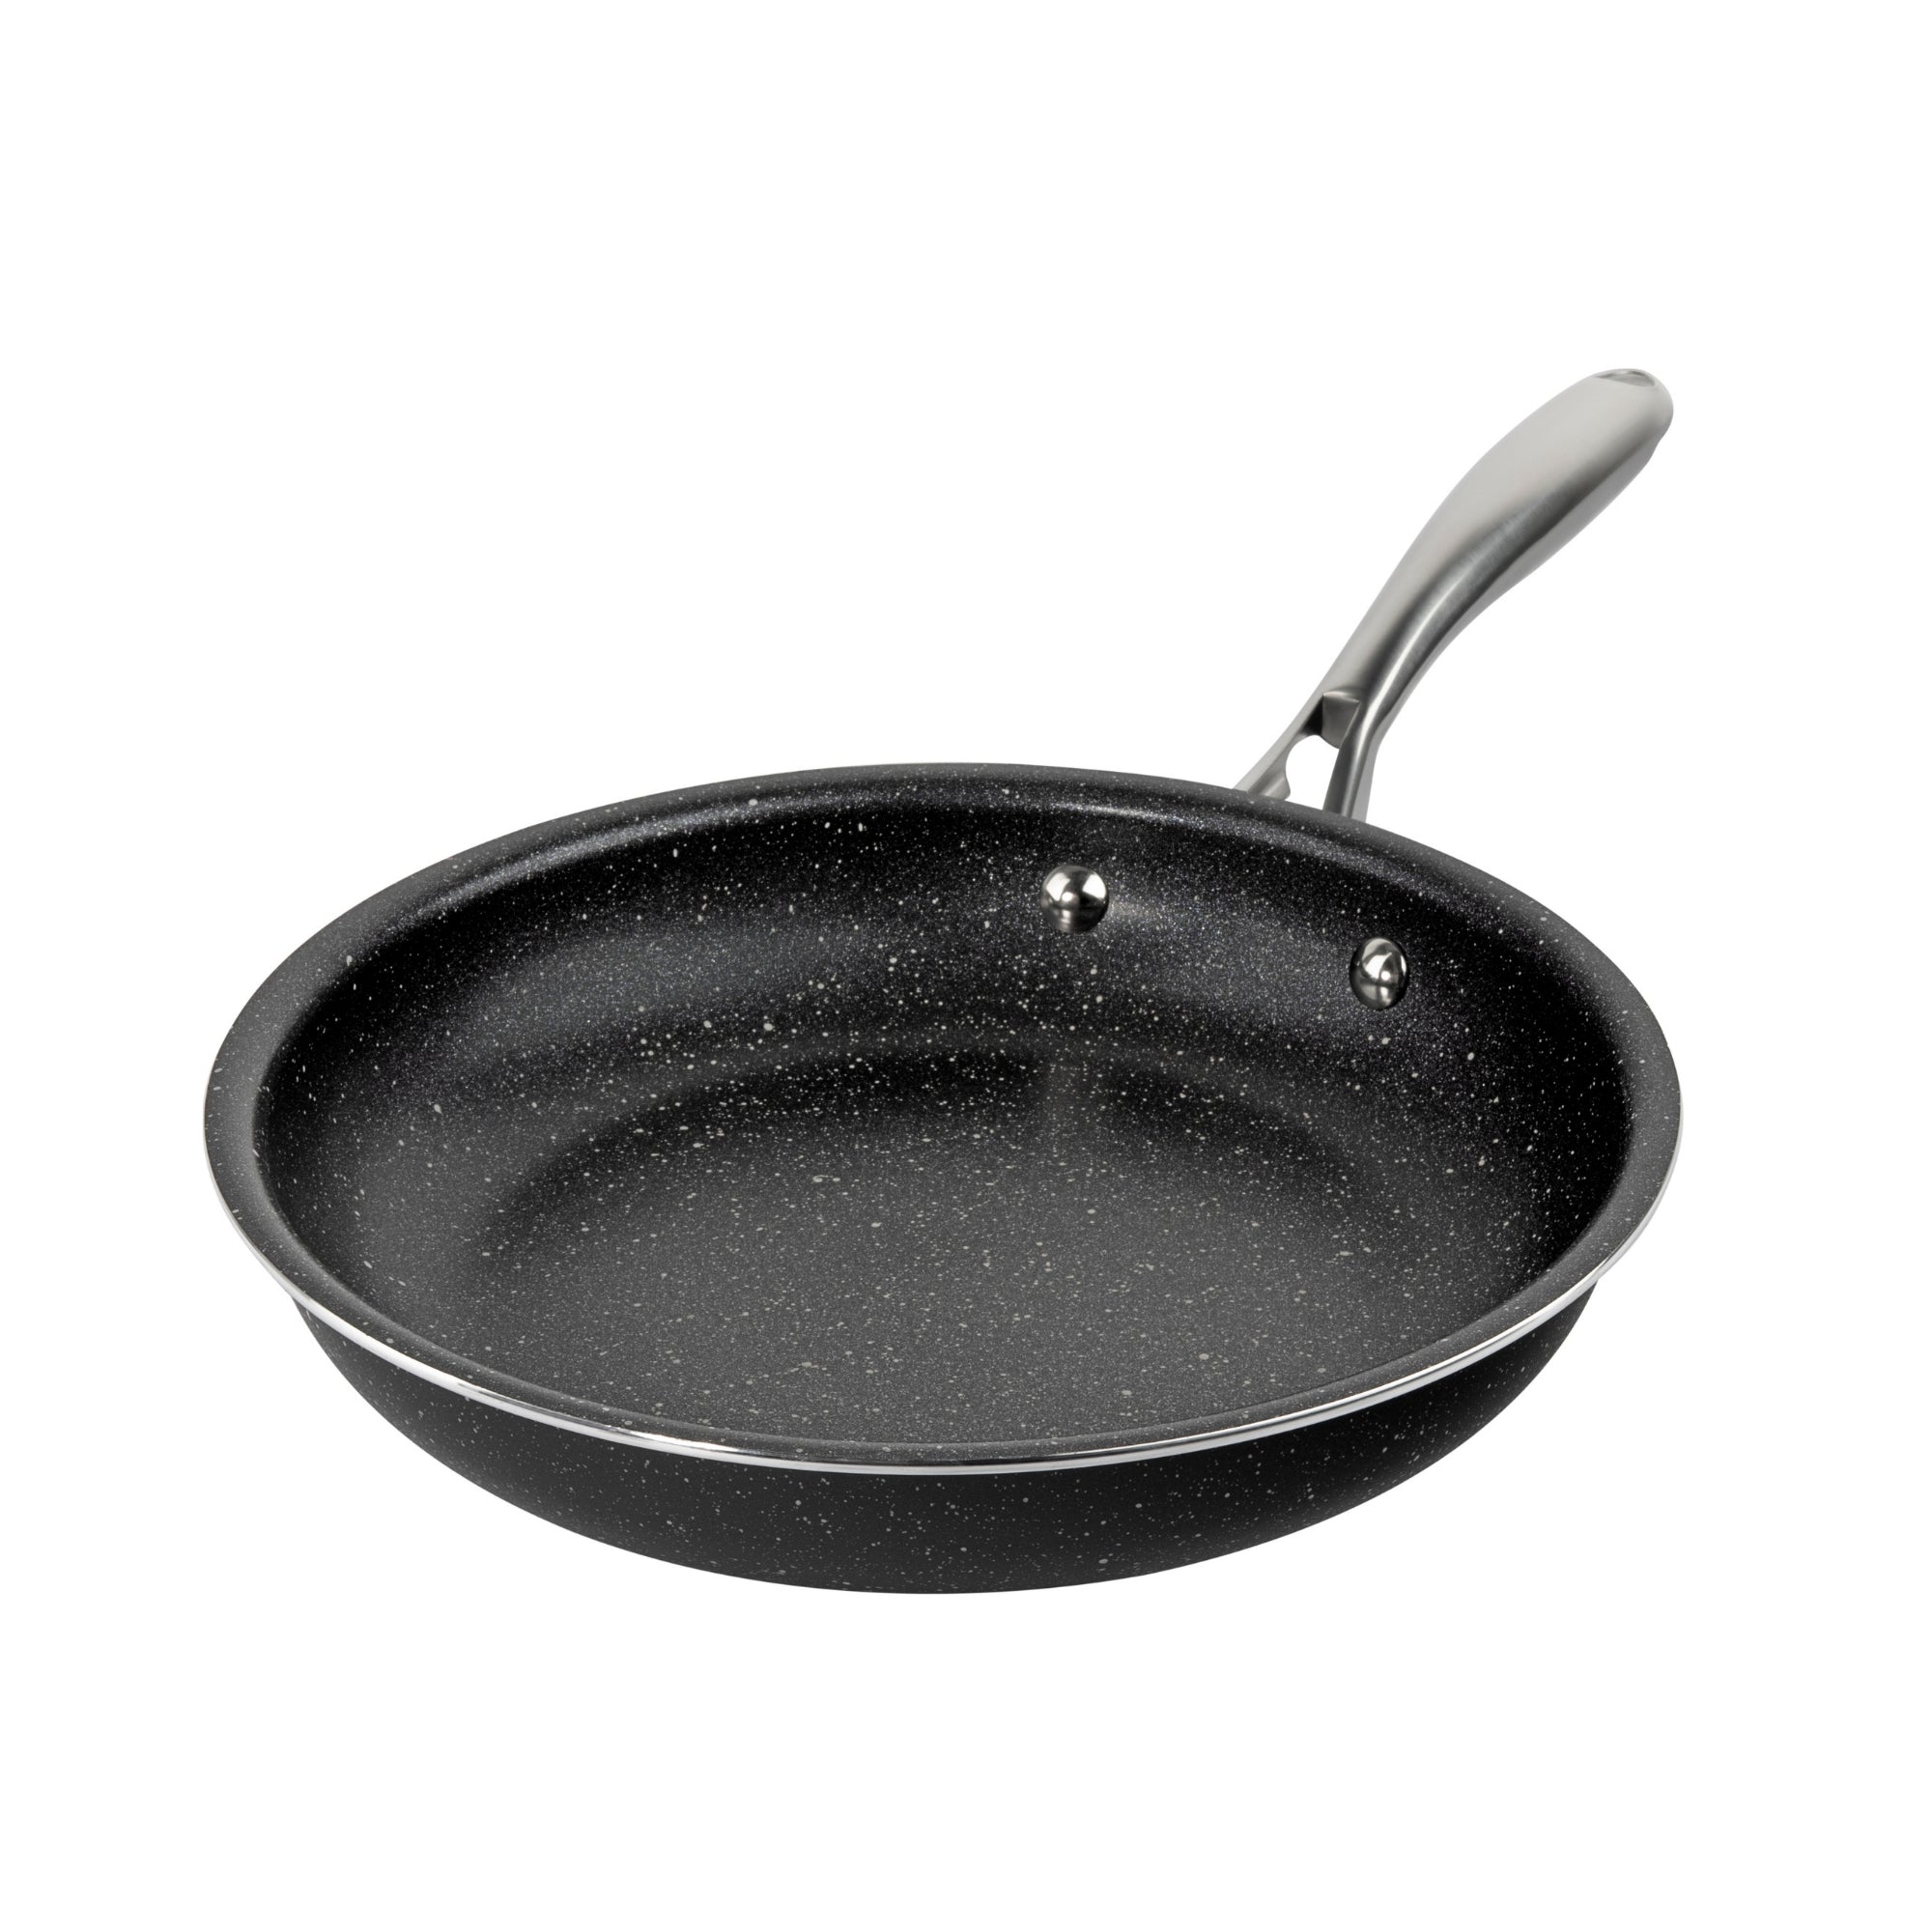 Granitestone 11 inch Nonstick Frying Pan, Ultra Durable Mineral Coated Nonstick  Skillet, 100% PFOA Free Fry Pan with Stainless Steel Stay Handle, Oven and  Dishwasher Safe 